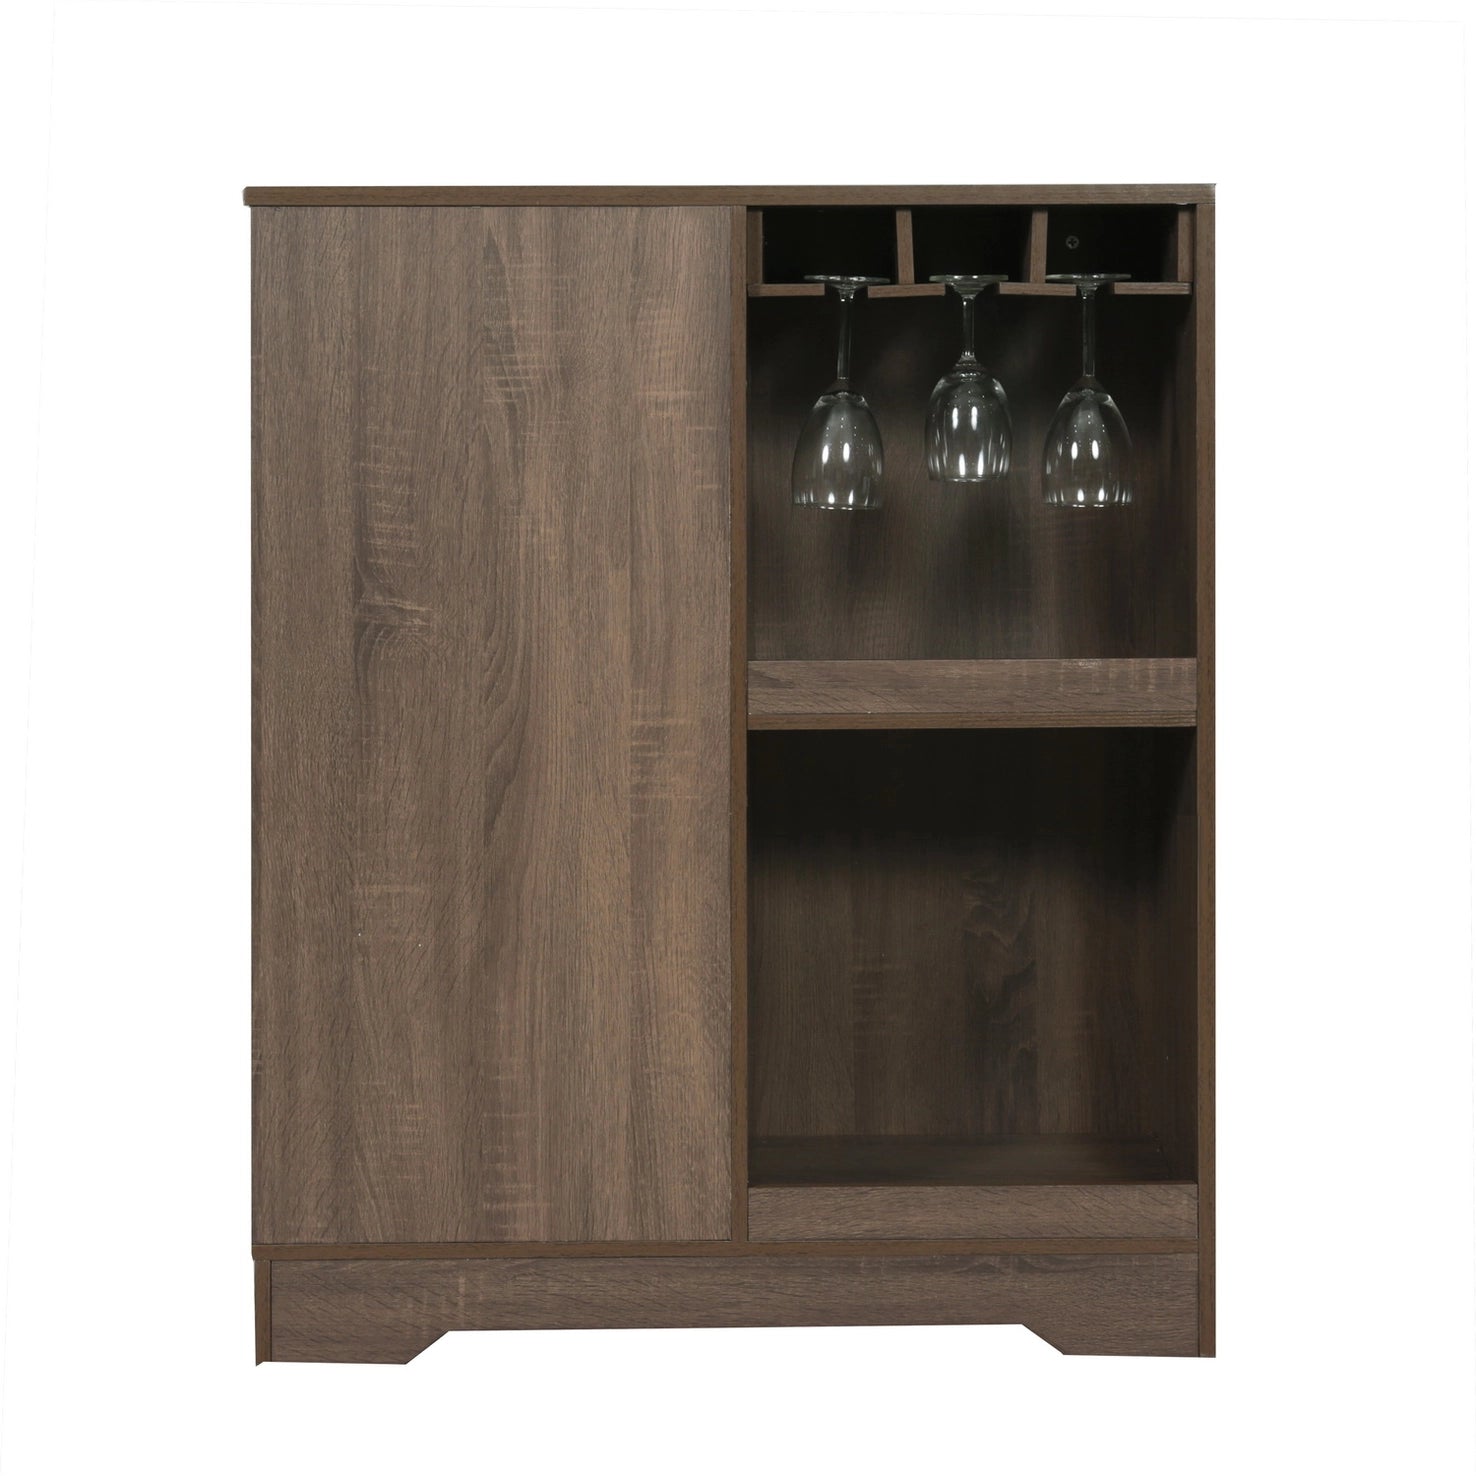 Olinbe Rustic Brown Multifunctional Bar Table with Storage